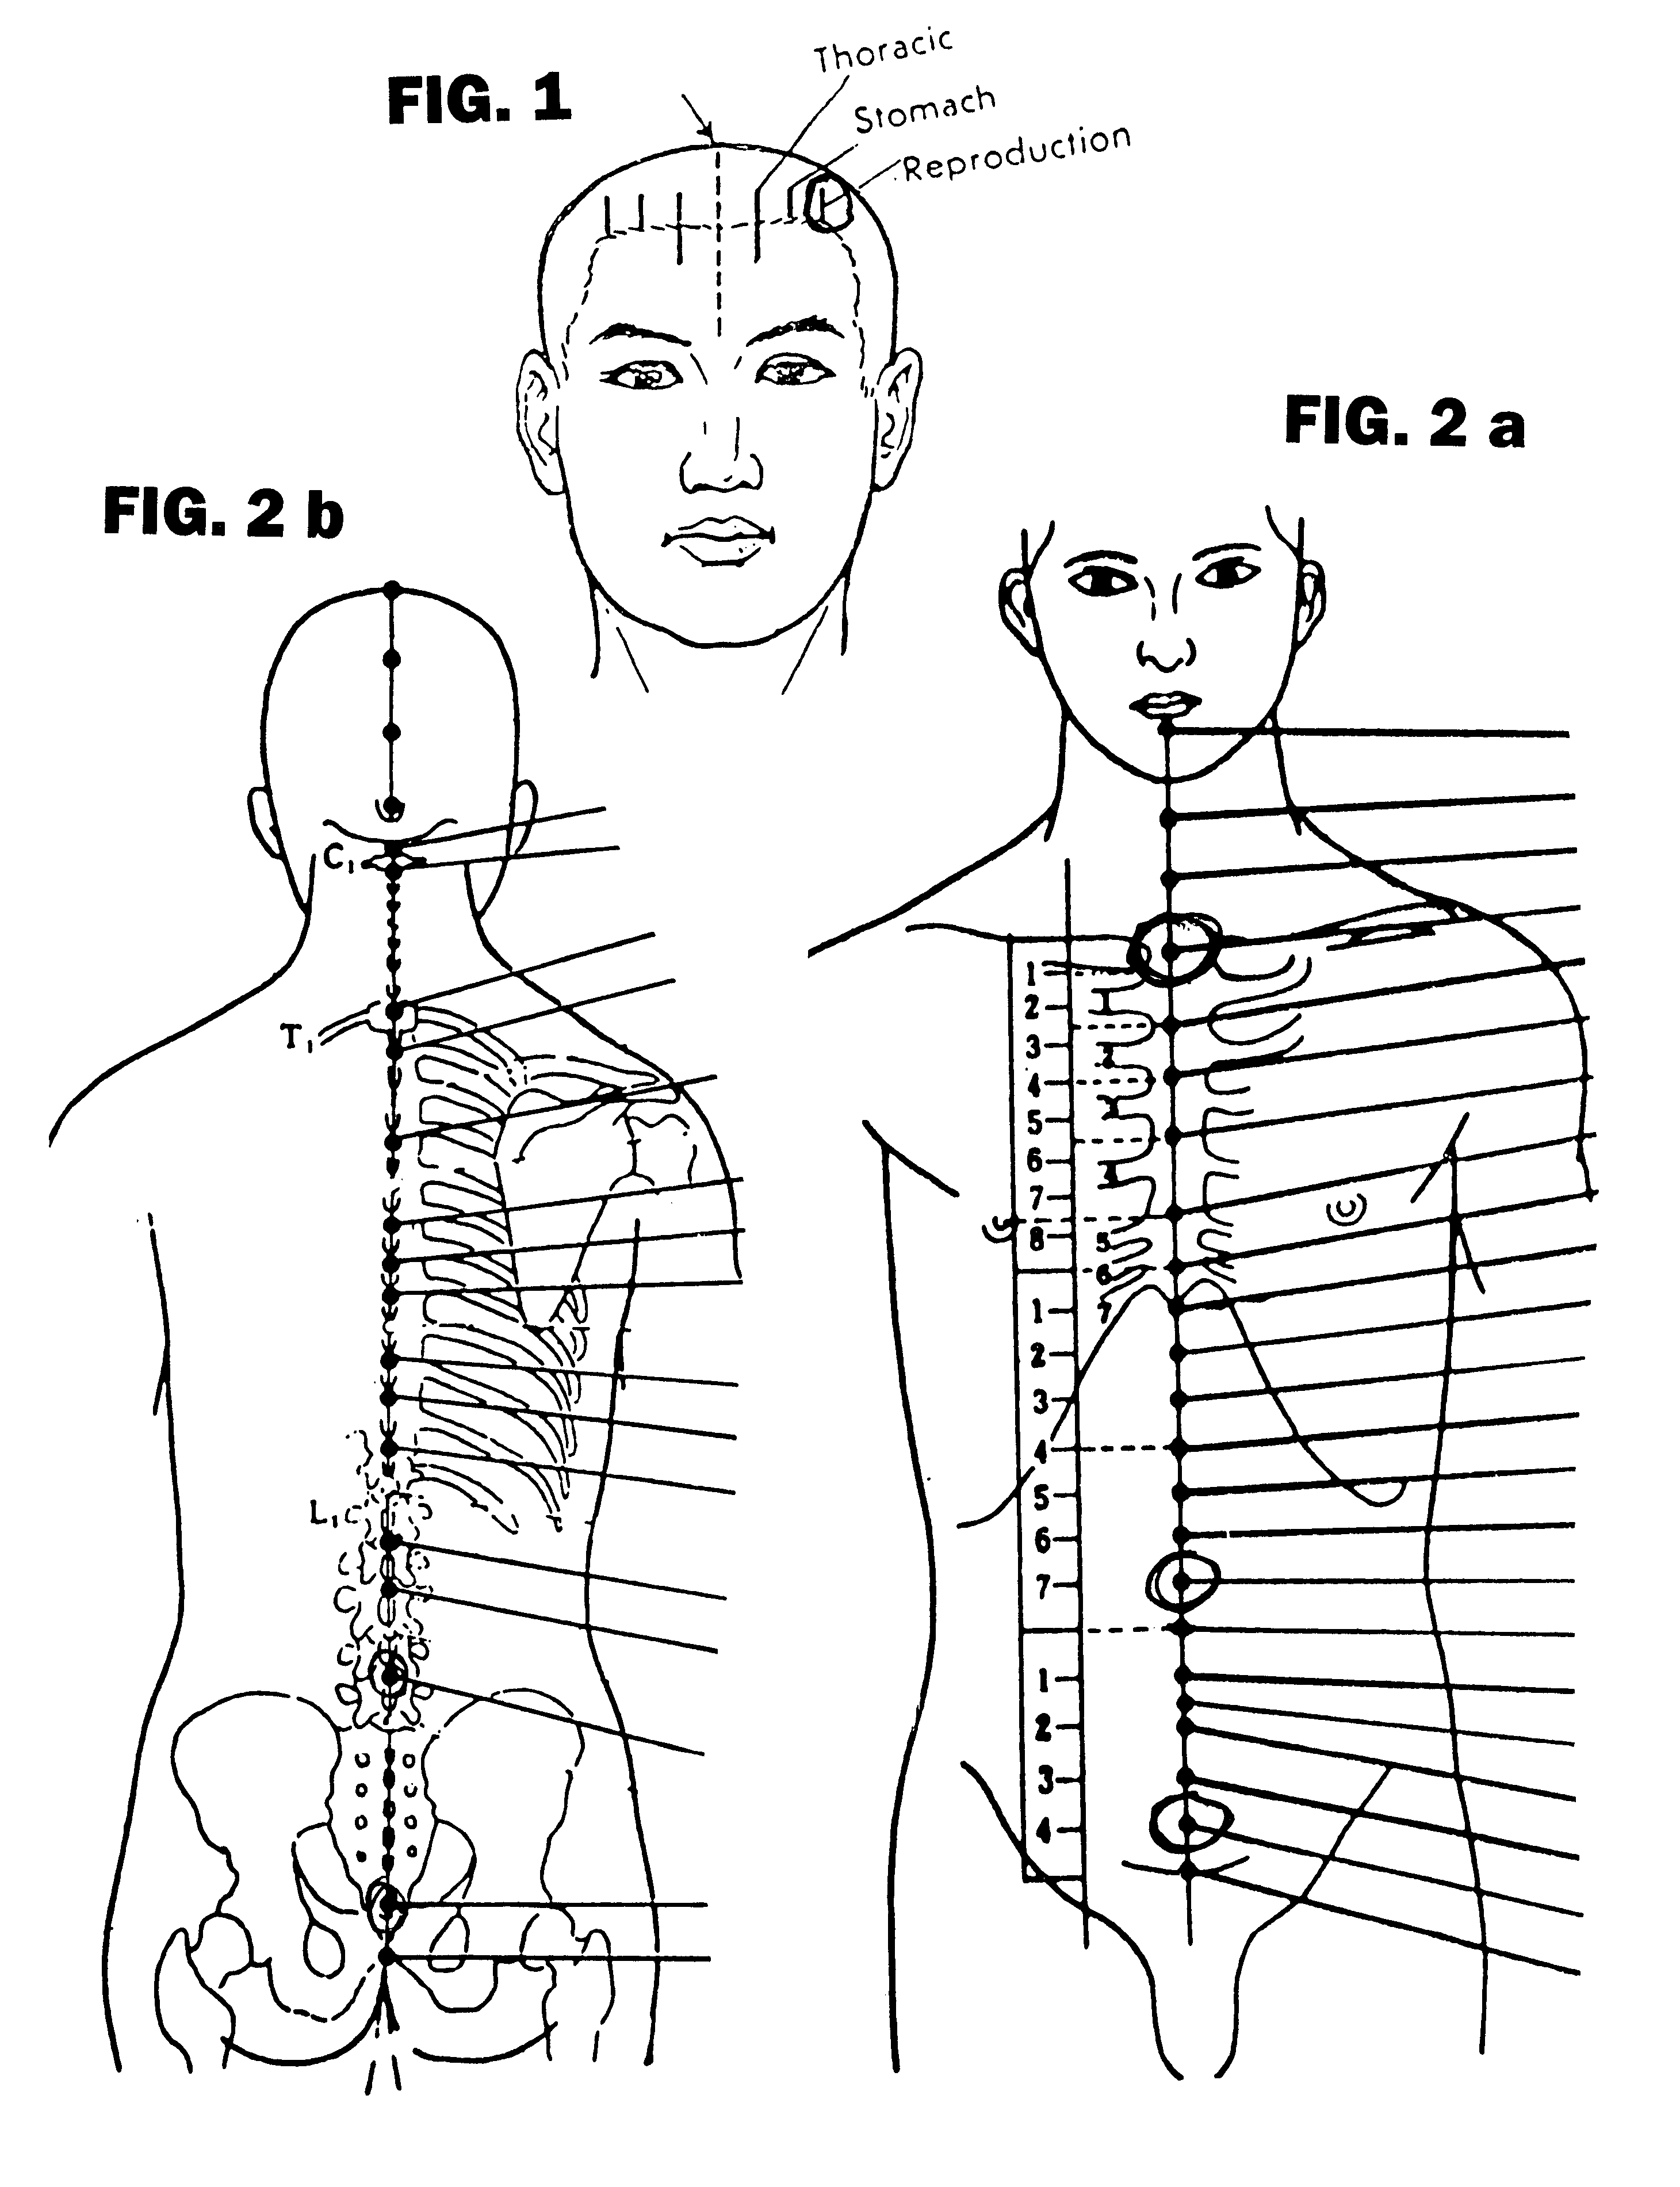 System and method for treatment of infertility